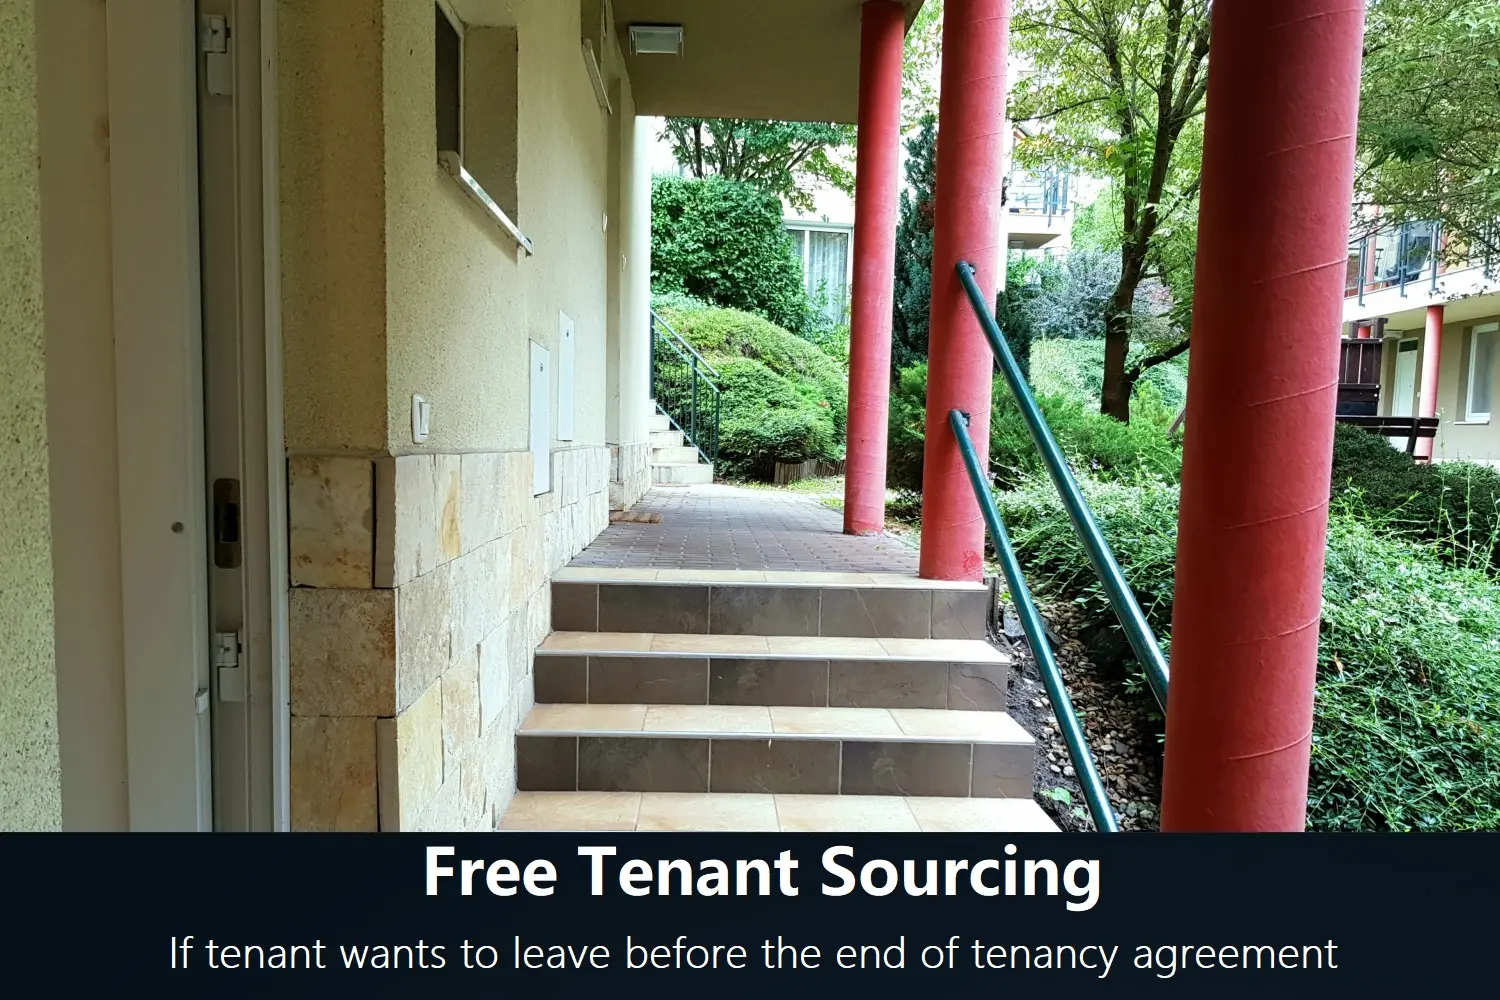 Free tenant sourcing if tenant wants to leave before the end of tenancy agreement